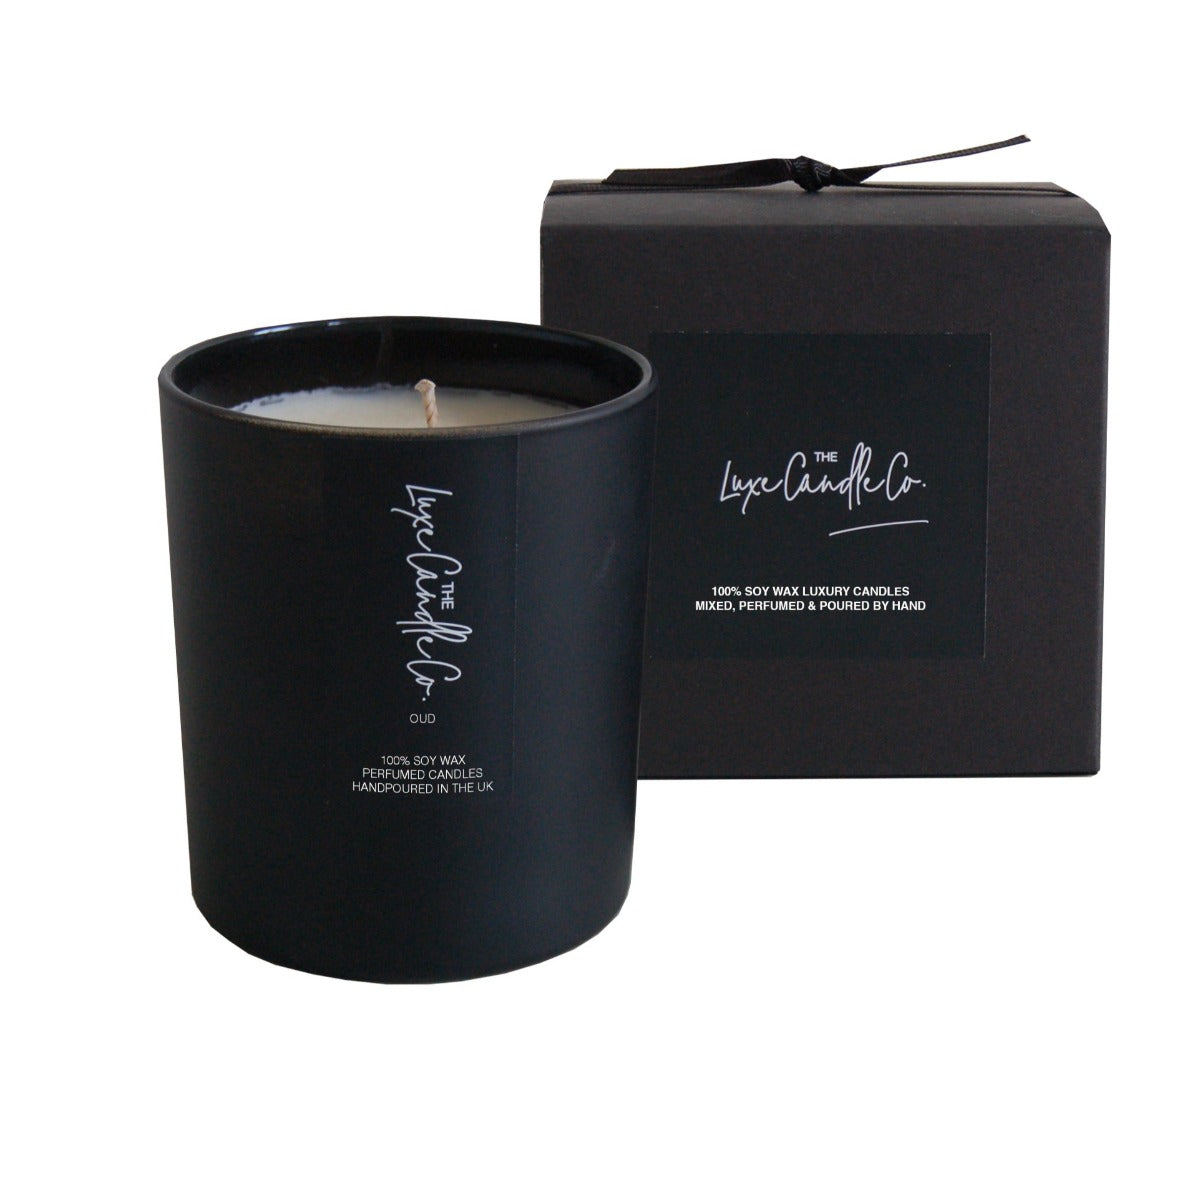 Luxury soy wax candle with oud scent fragrance in black glass jar